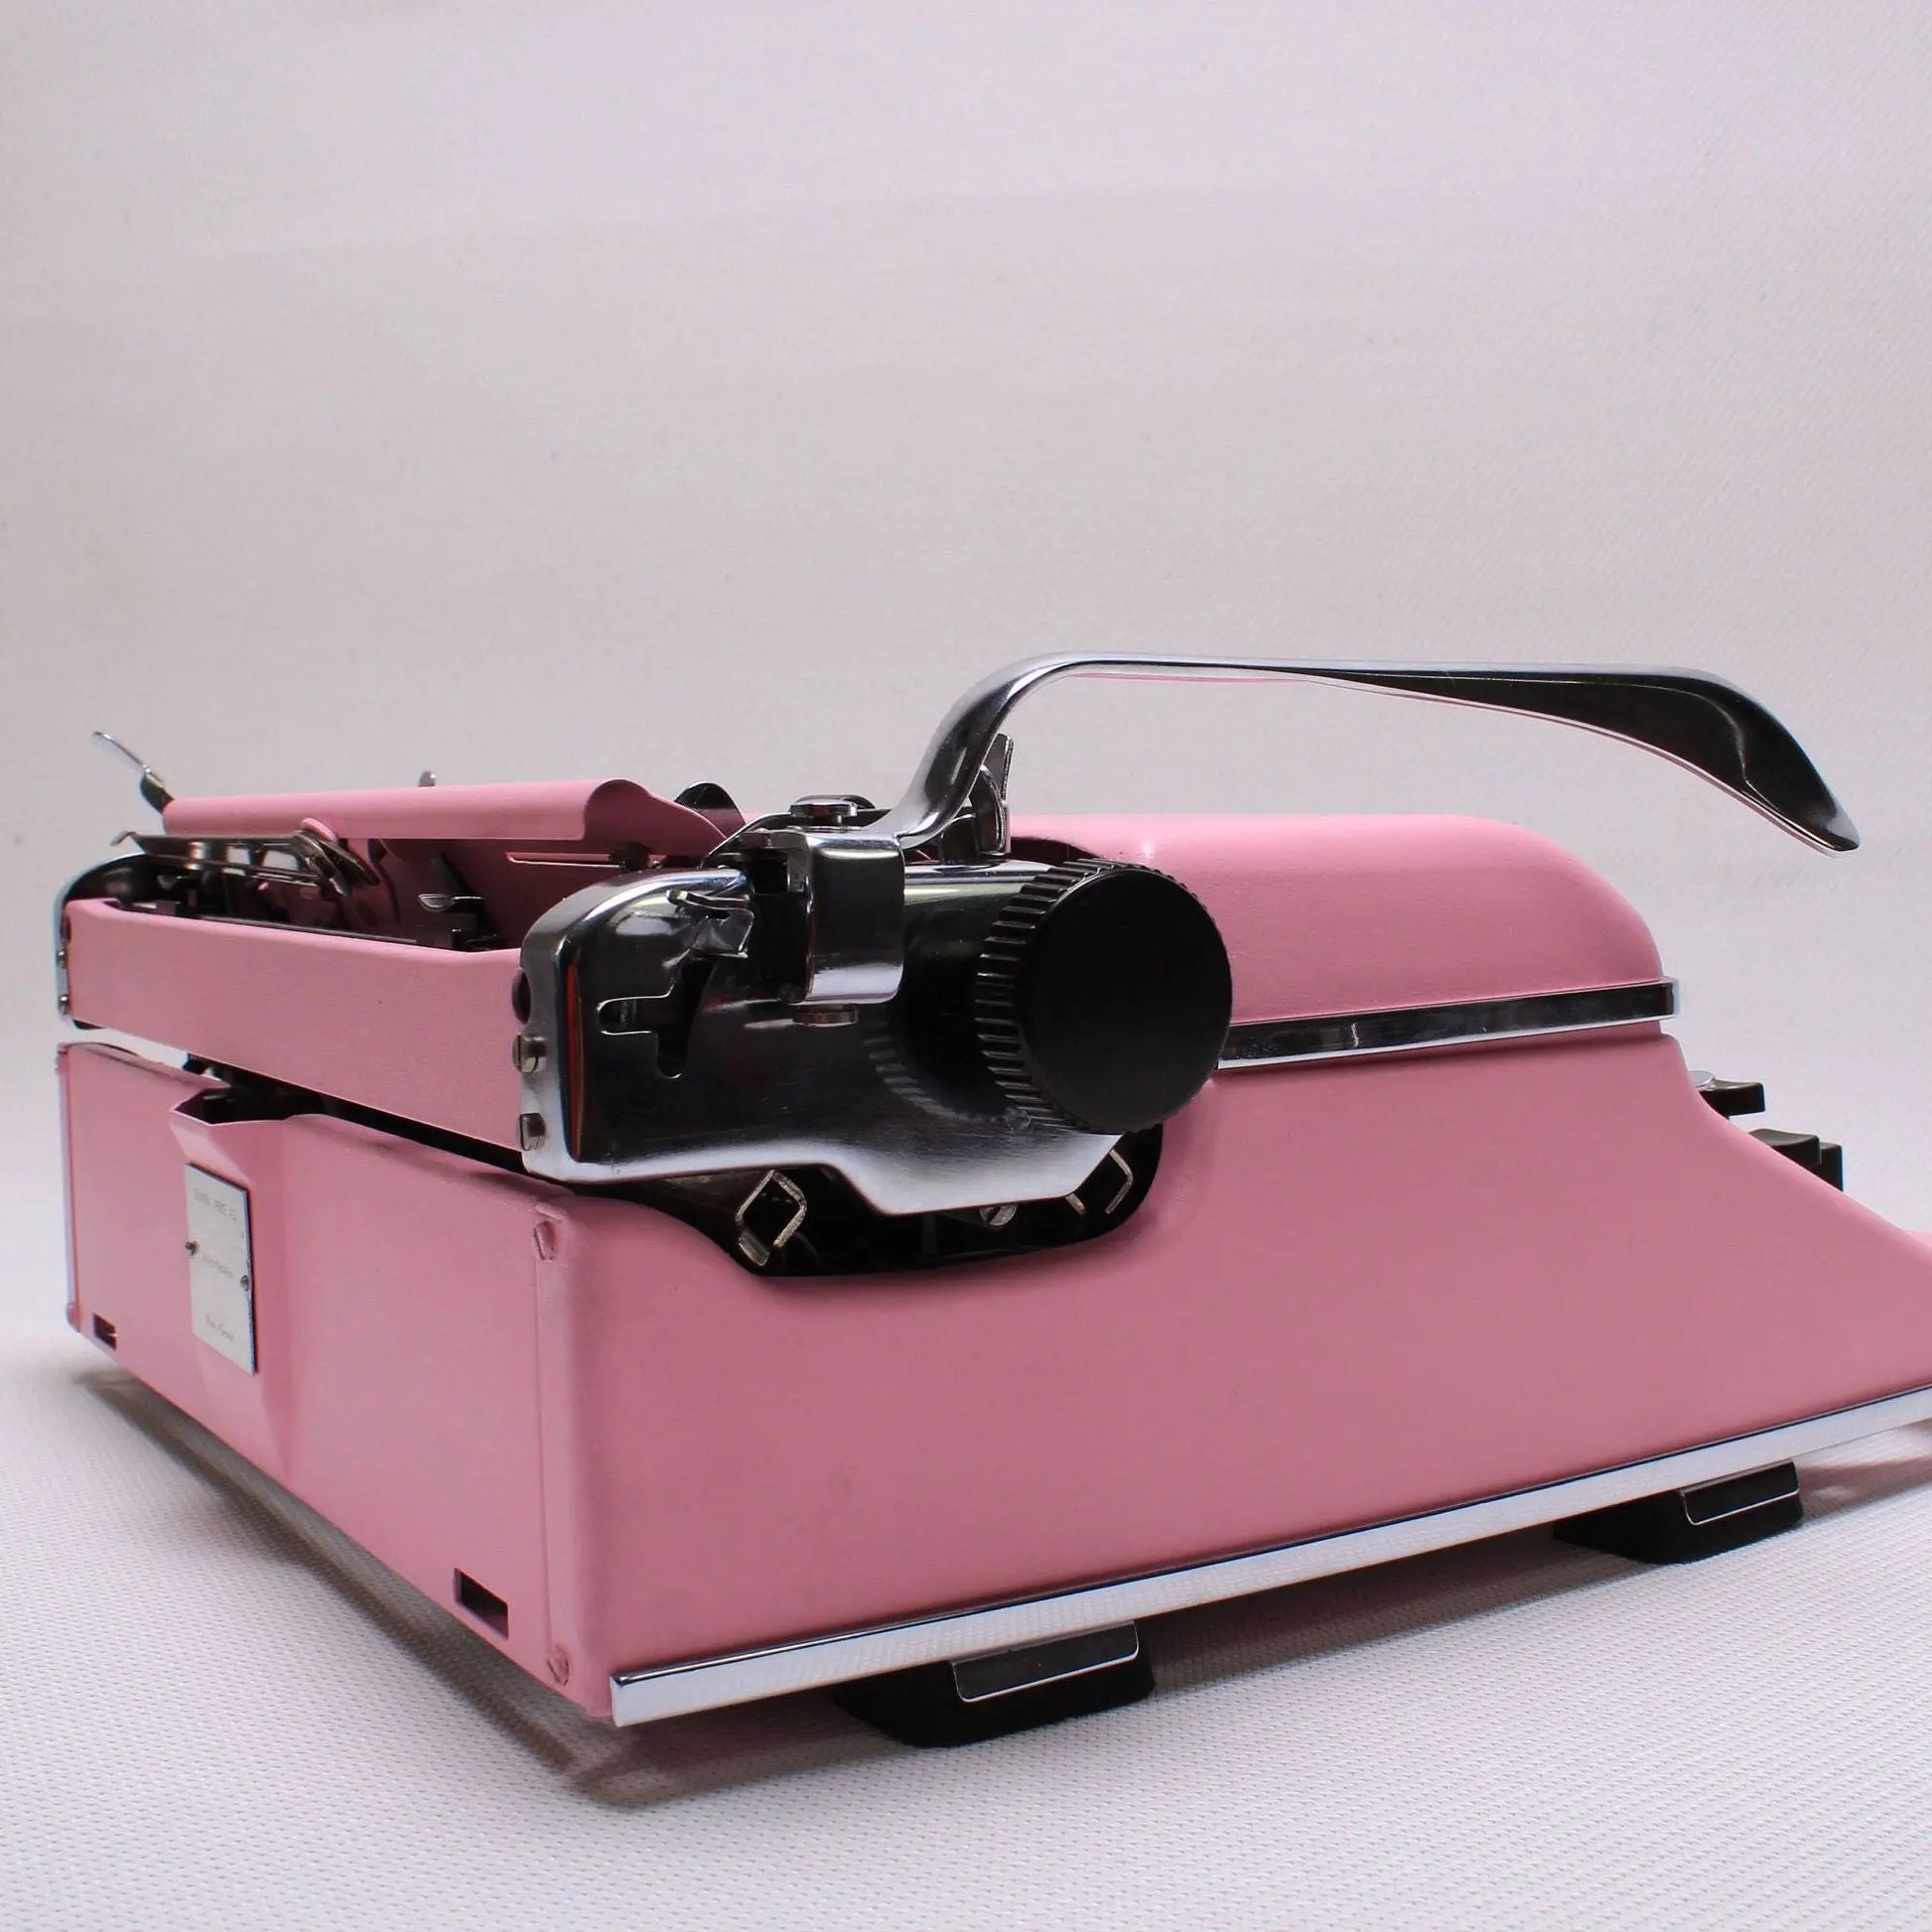 Olympia SM3 Flamingo Pink Typewriter, Vintage, Mint Condition, Manual Portable, Professionally Serviced by Typewriter.Company - ElGranero Typewriter.Company